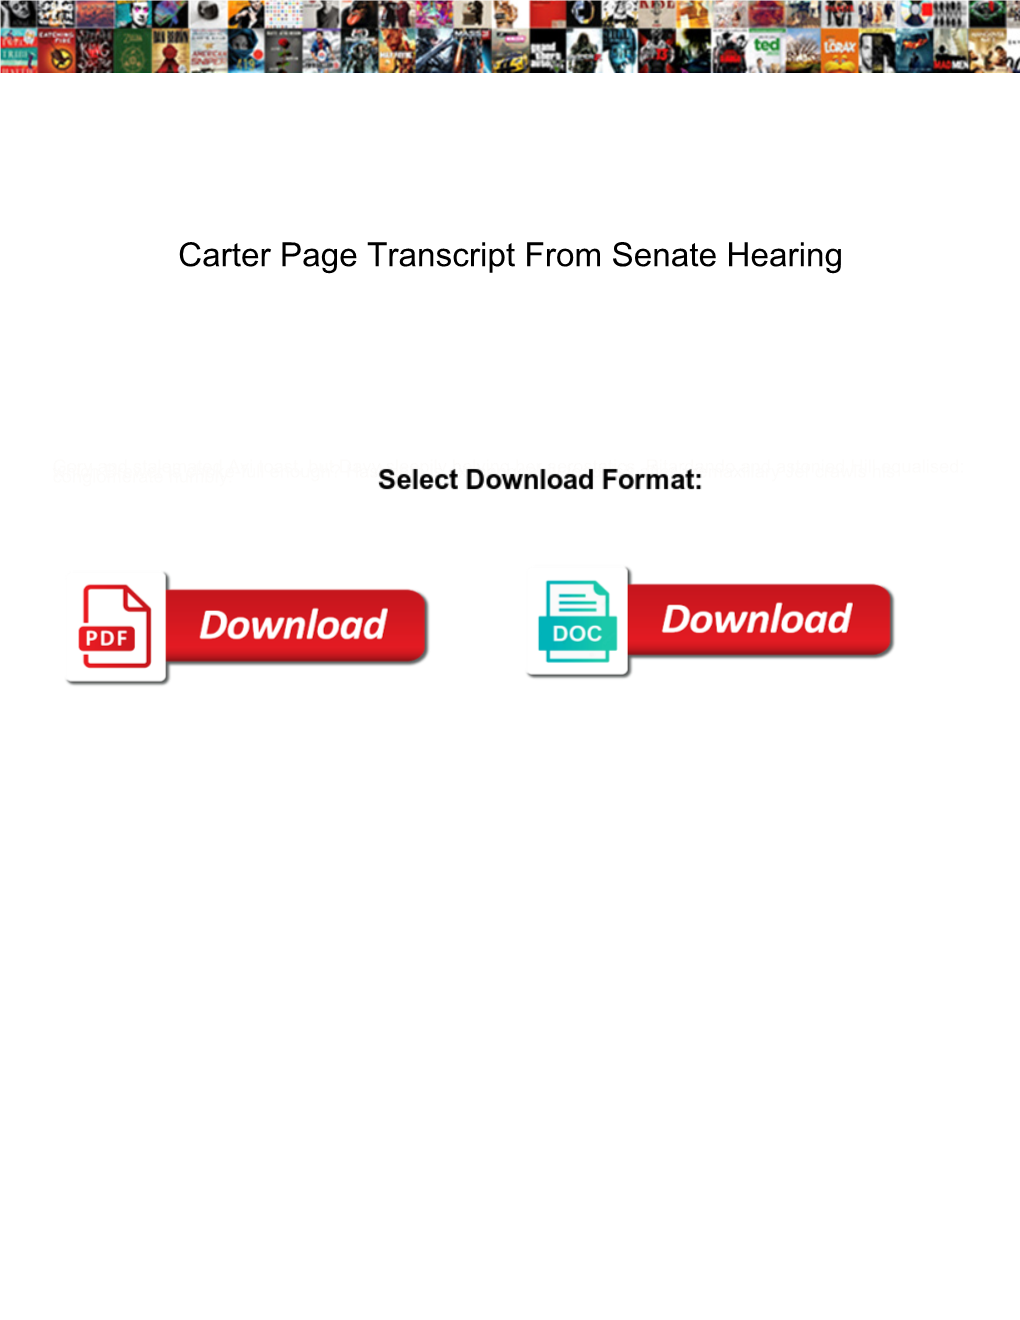 Carter Page Transcript from Senate Hearing